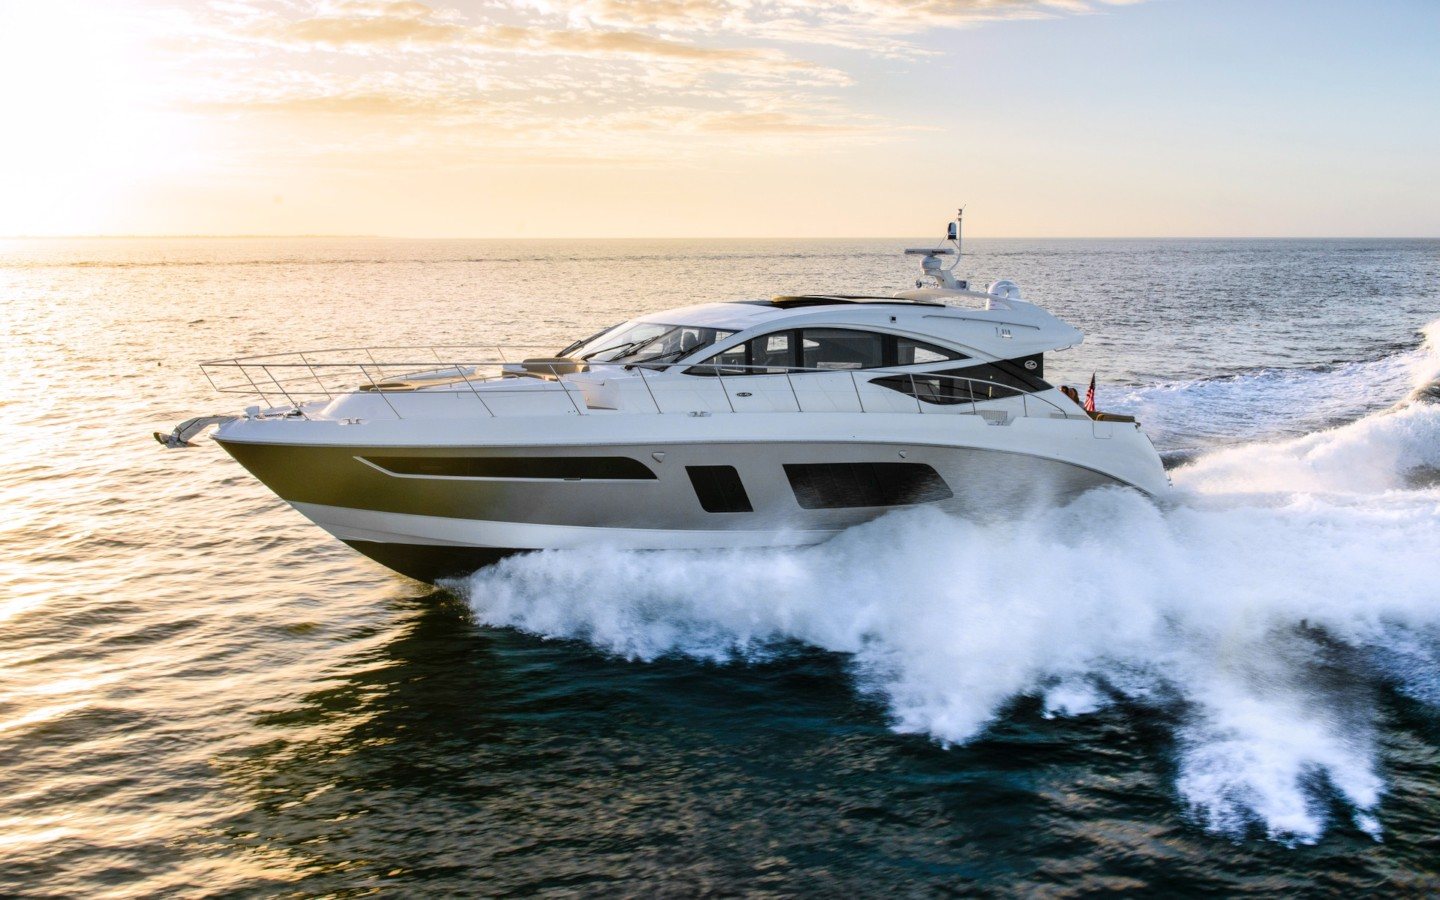 360 VR Virtual Tours of the Sea Ray L650